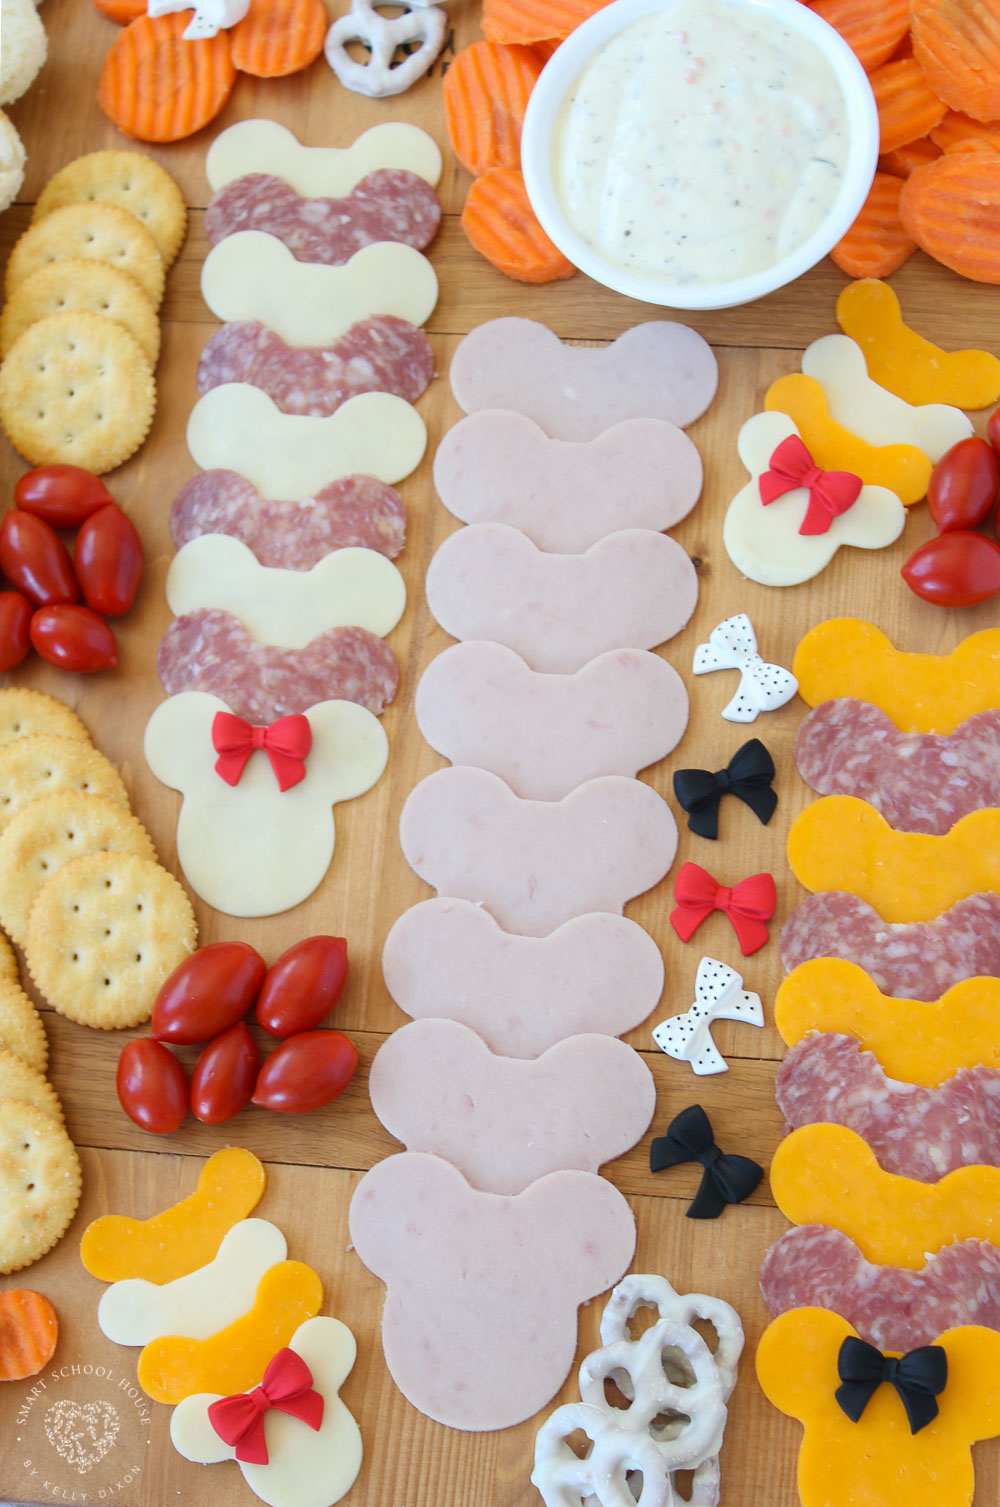 Disney Snack Board - filled with cheese and meat to make Mickey Sandwiches!